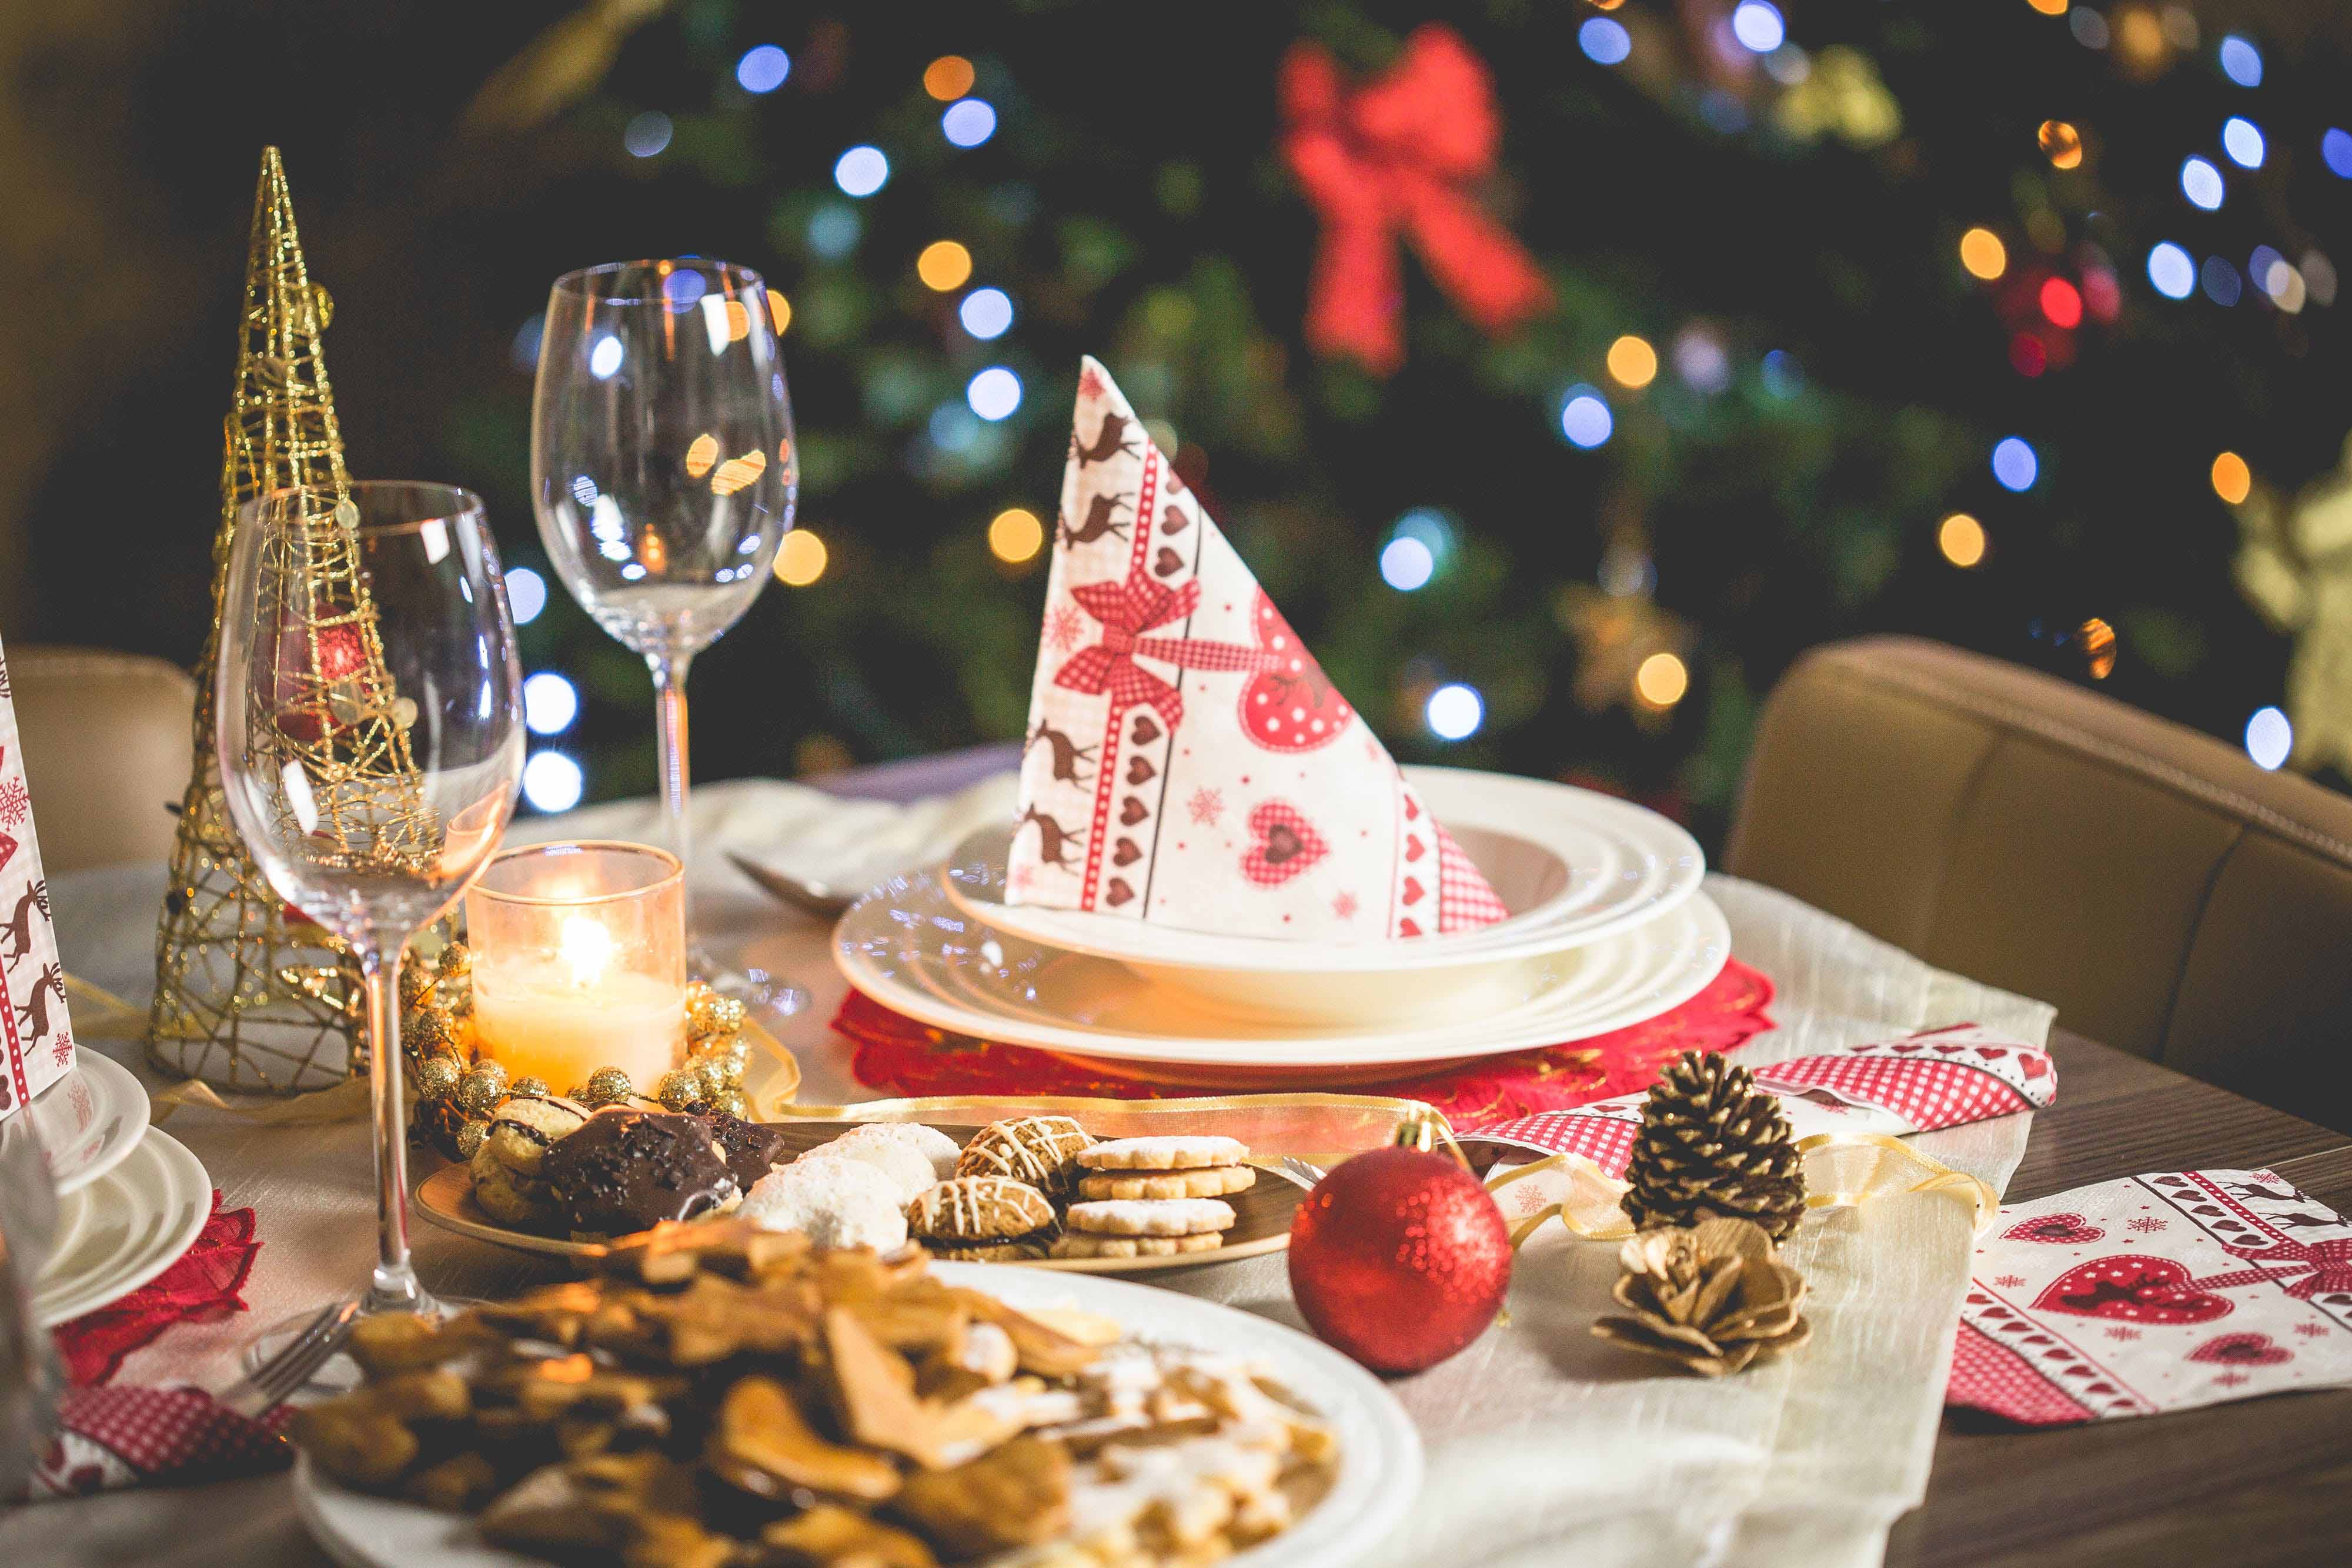 a table laden with holiday food and decor